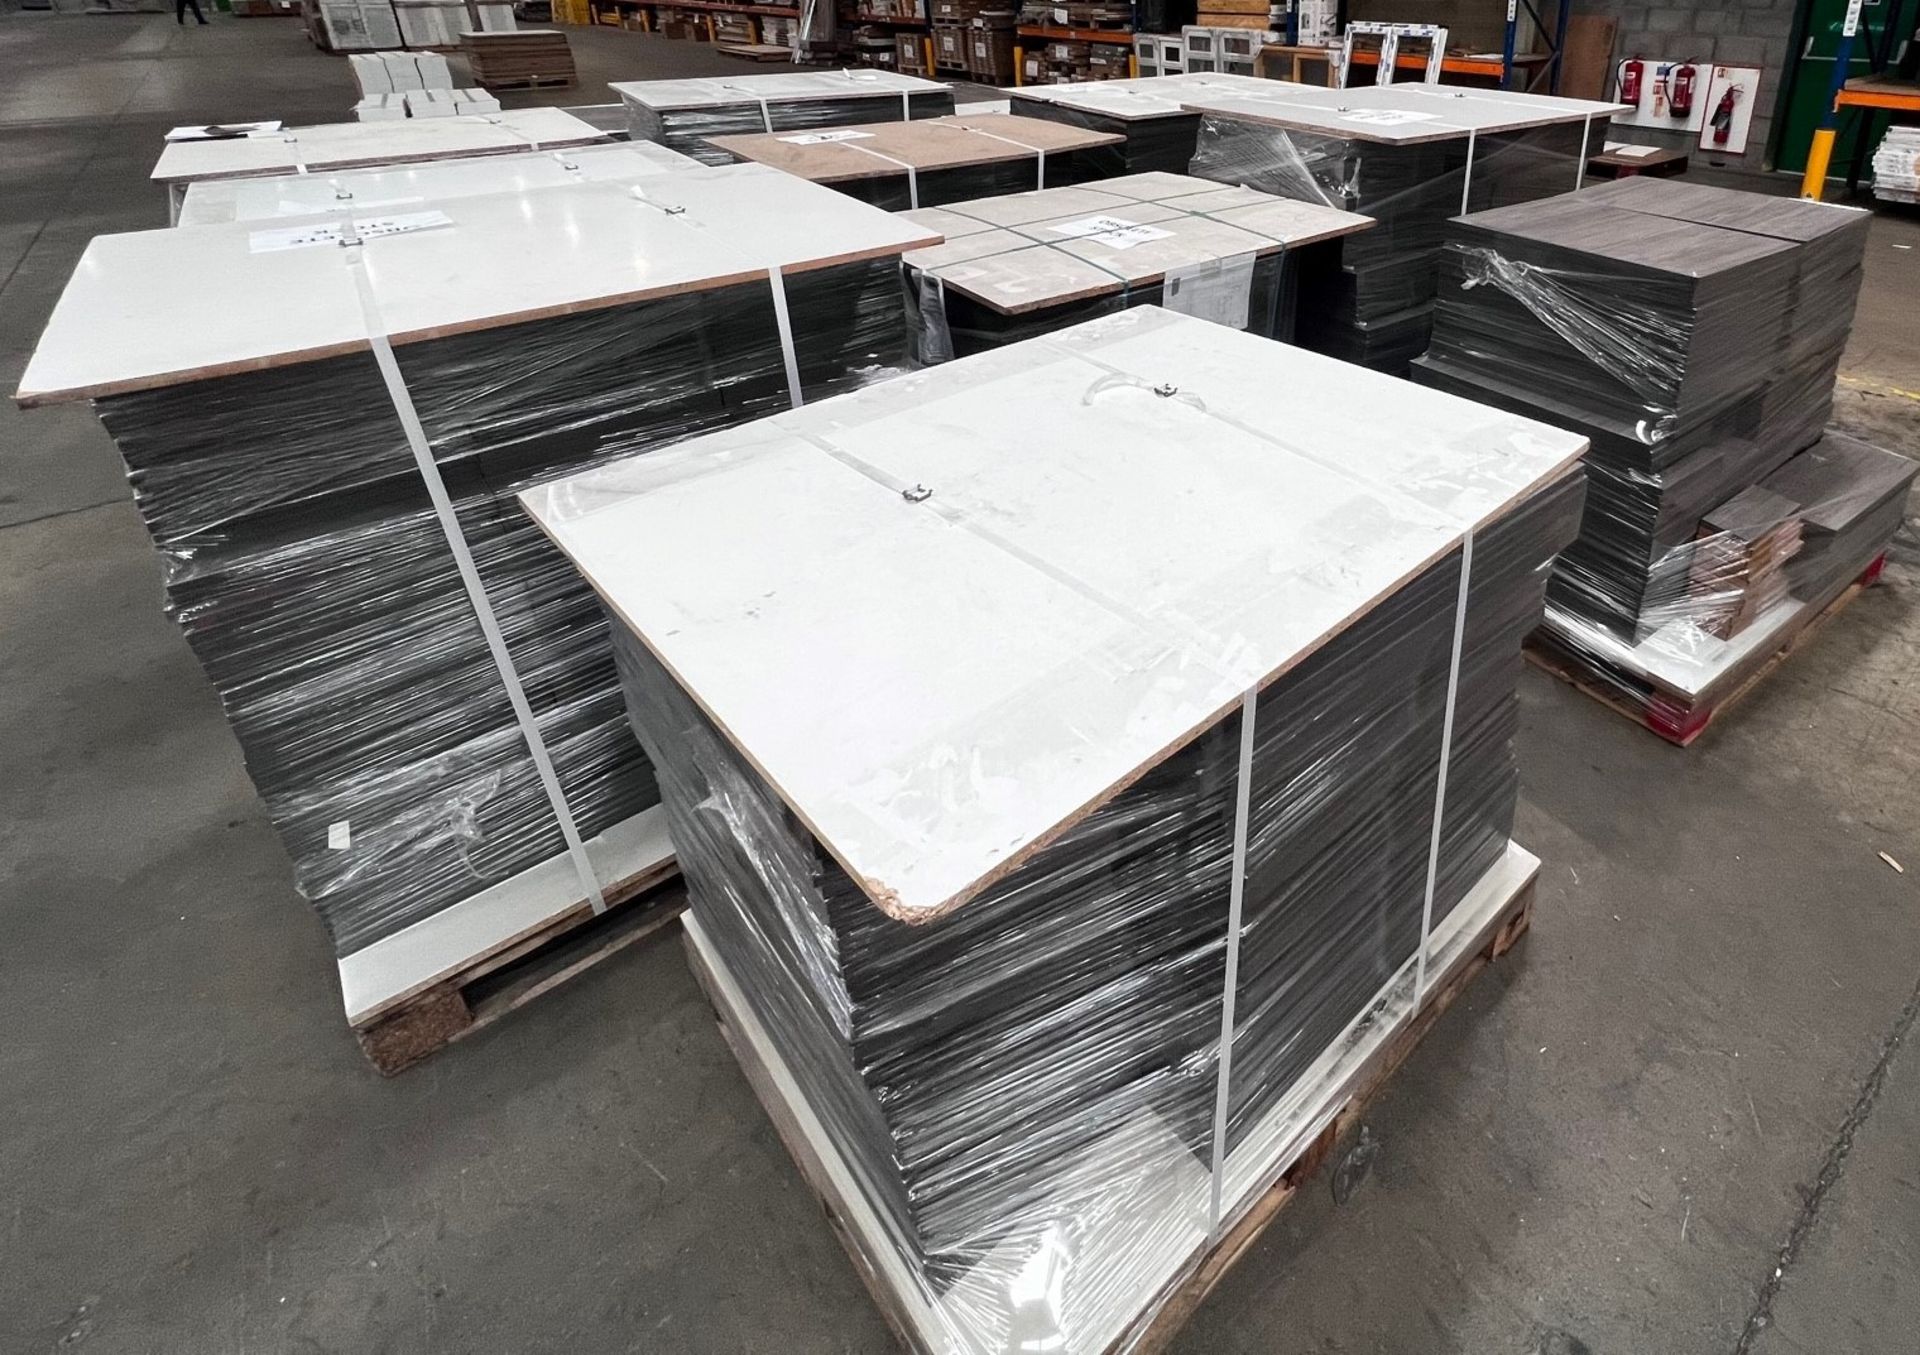 2761 Driftwood colour kitchen doors and drawer fronts, brand new 13 pallets, ready to load. - Image 11 of 14